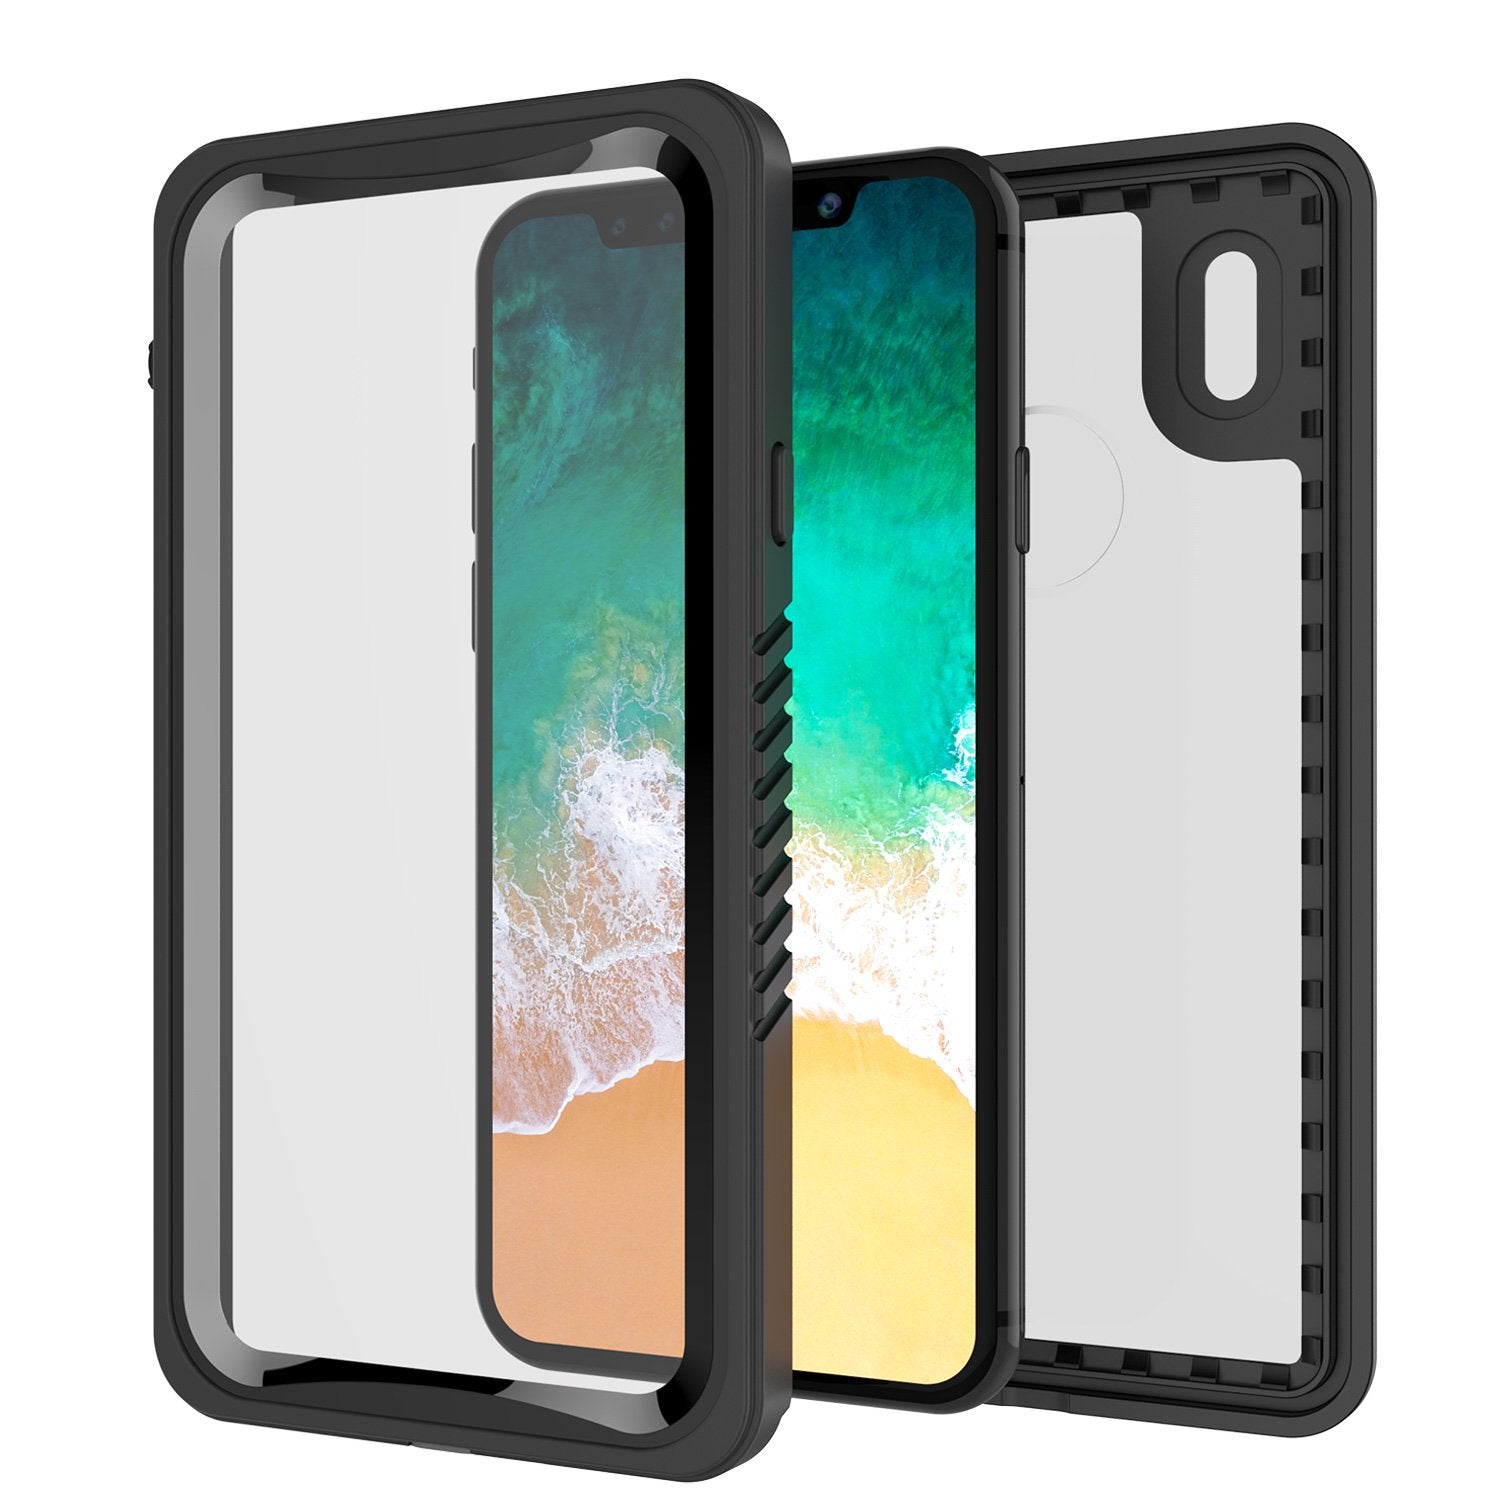 iPhone X Case, Punkcase [Extreme Series] [Slim Fit] [IP68 Certified] [Shockproof] [Snowproof] [Dirproof] Armor Cover W/ Built In Screen Protector for Apple iPhone 10 [BLACK]